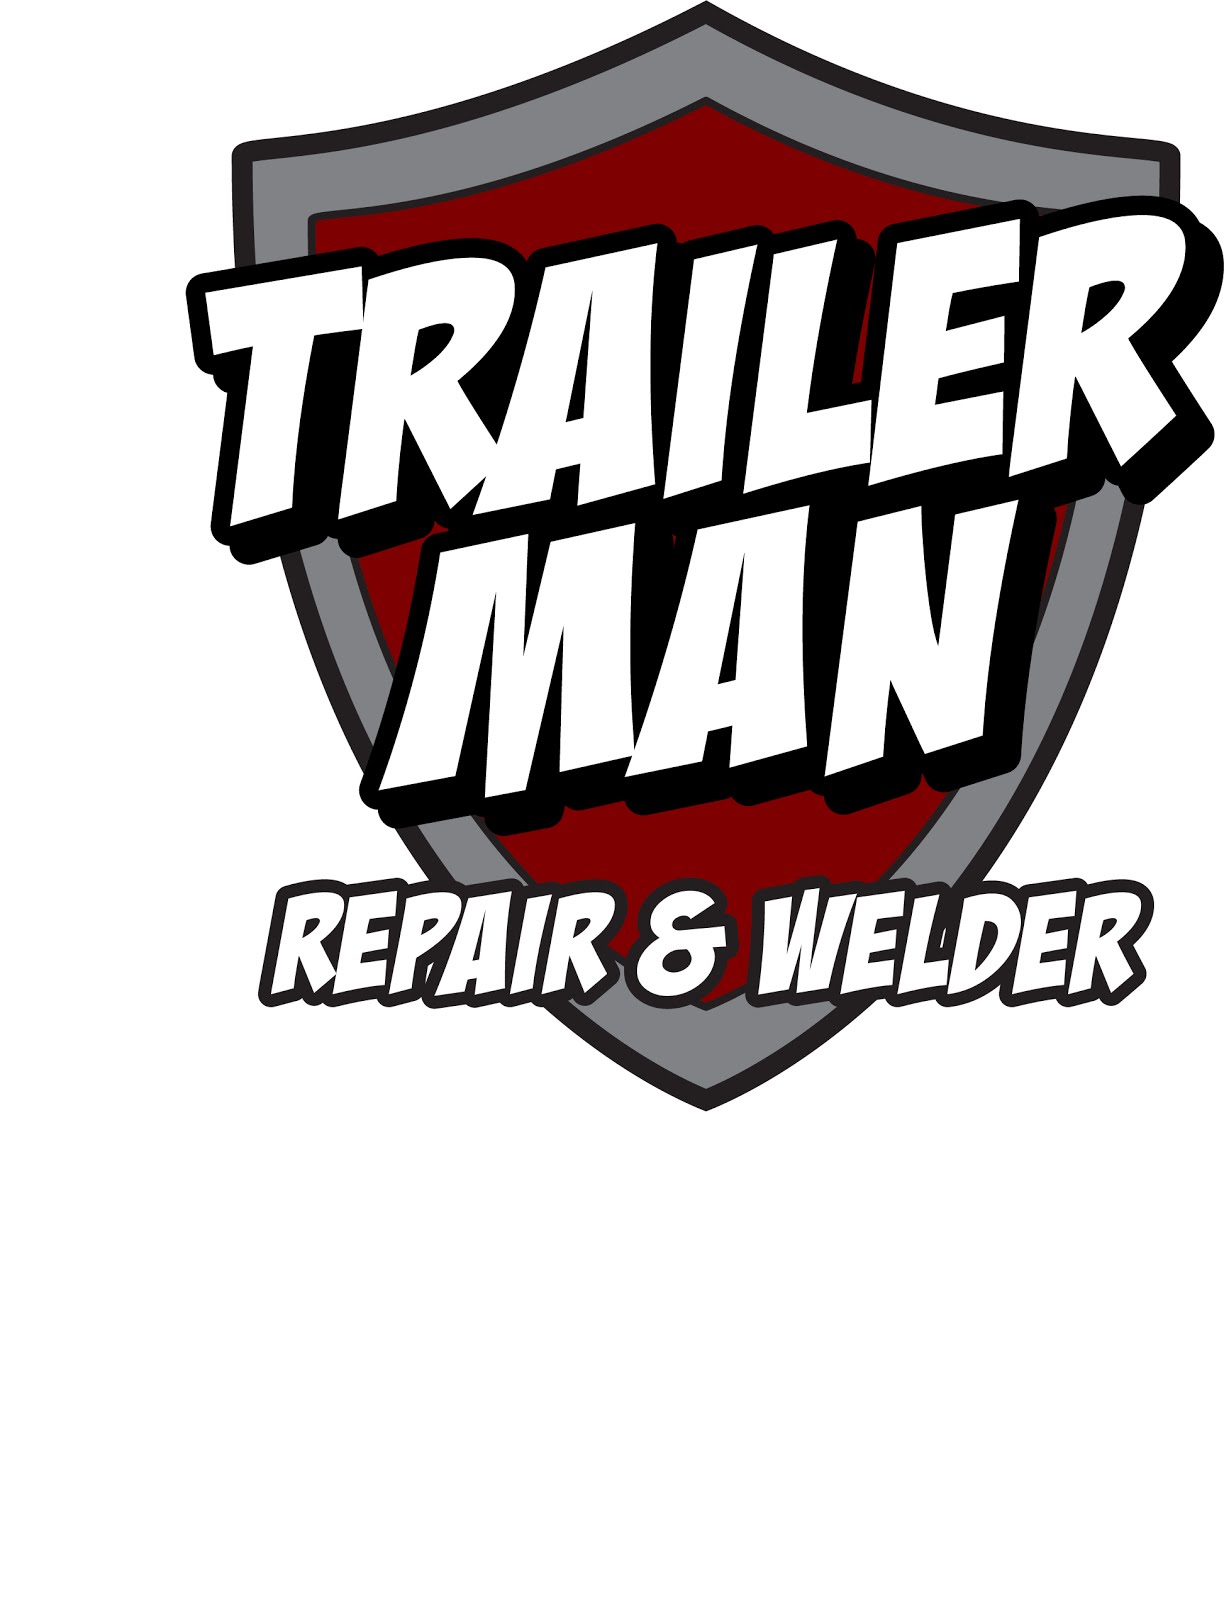 South Florida Trailer Repair hosted by The Trailerman